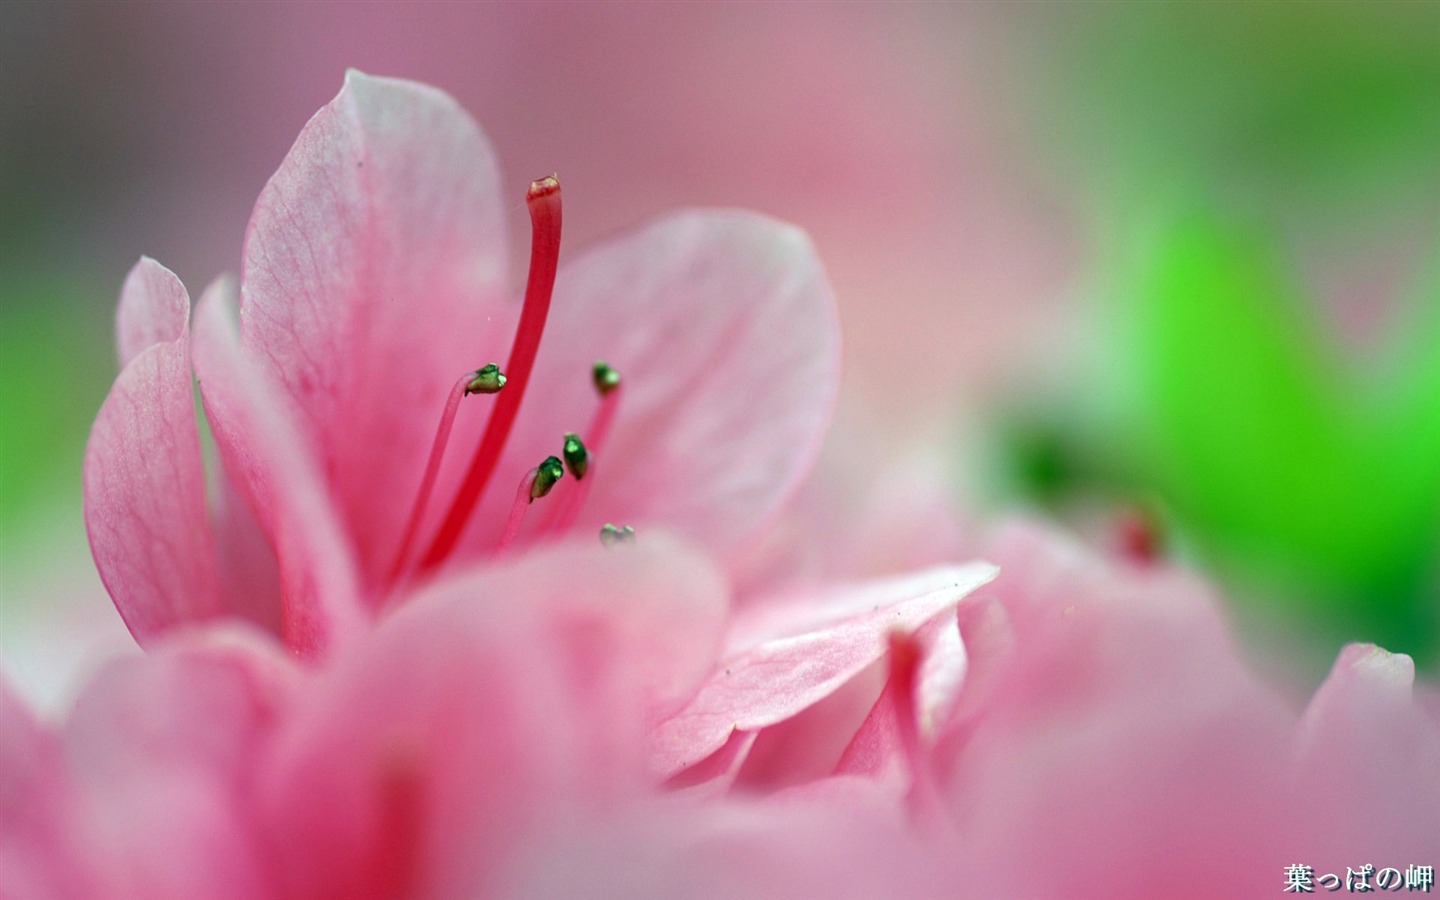 Personal Flowers HD Wallpapers #46 - 1440x900